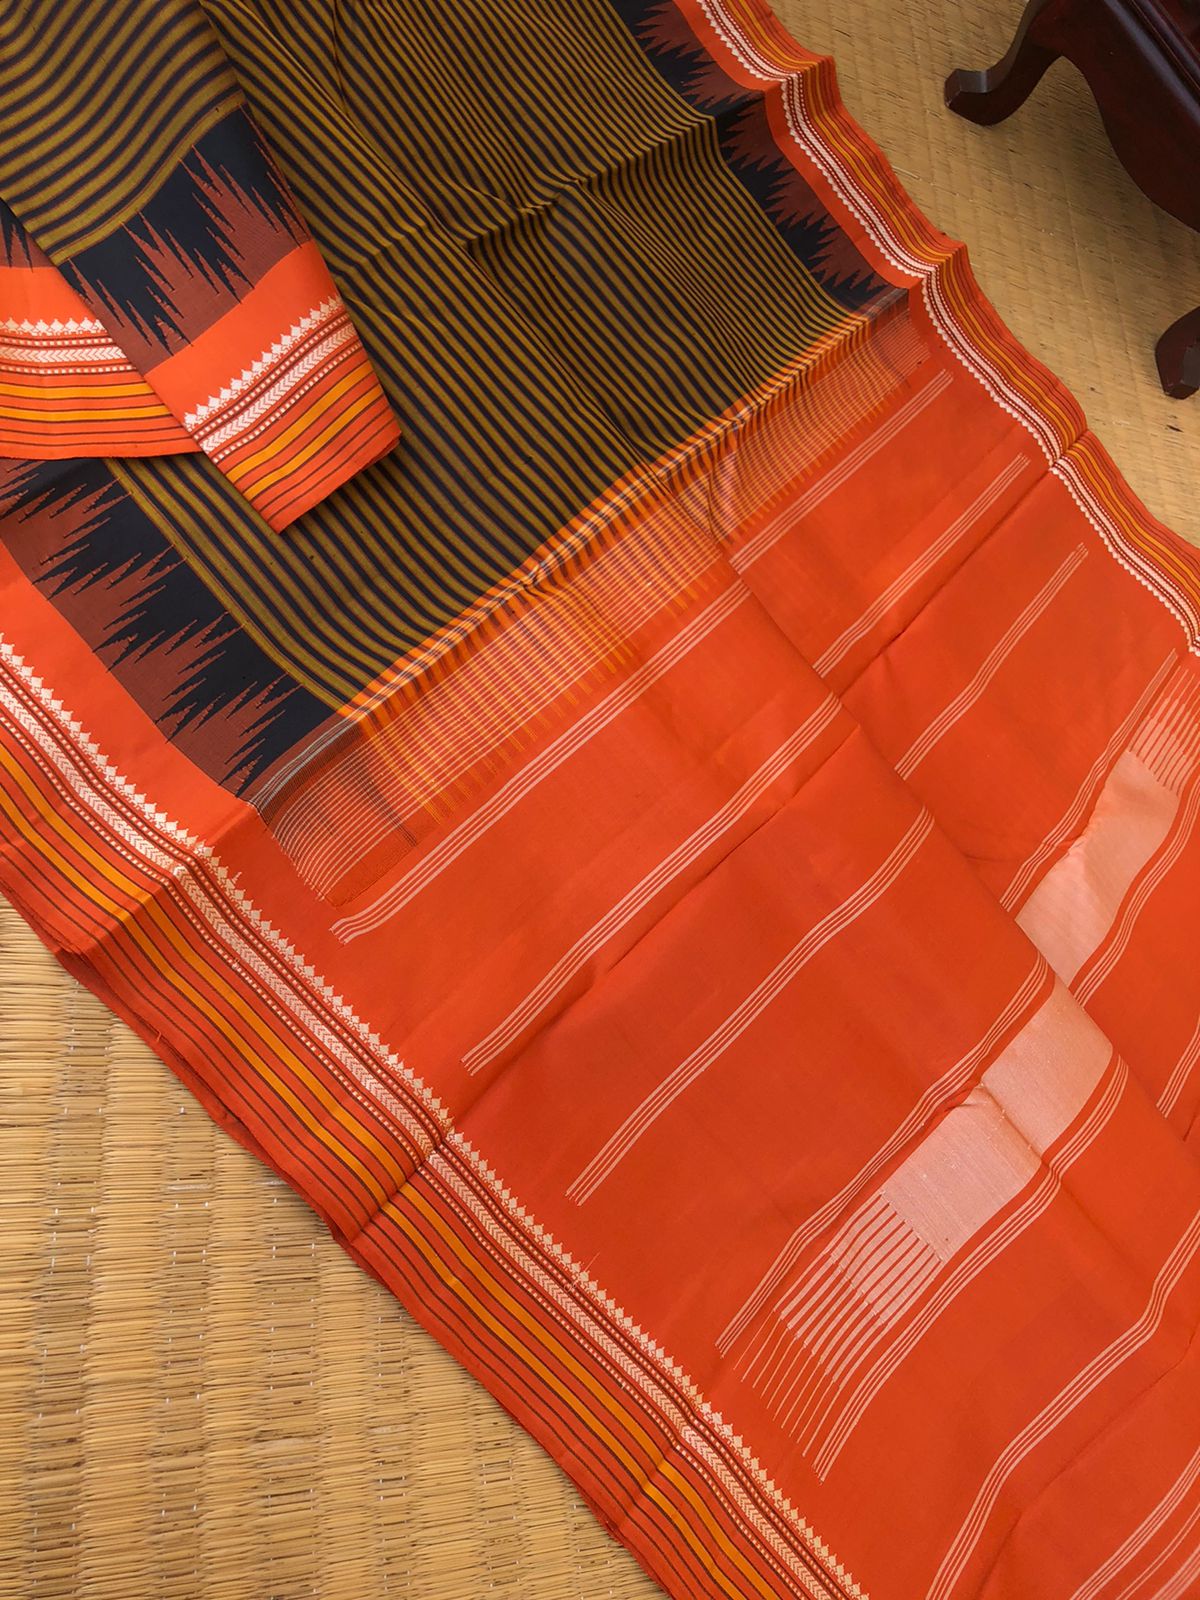 Connected by Korvai on Kanchivaram -beautiful vintage Black and rust valapoo stripes woven body with burnt orange pallu and blouse